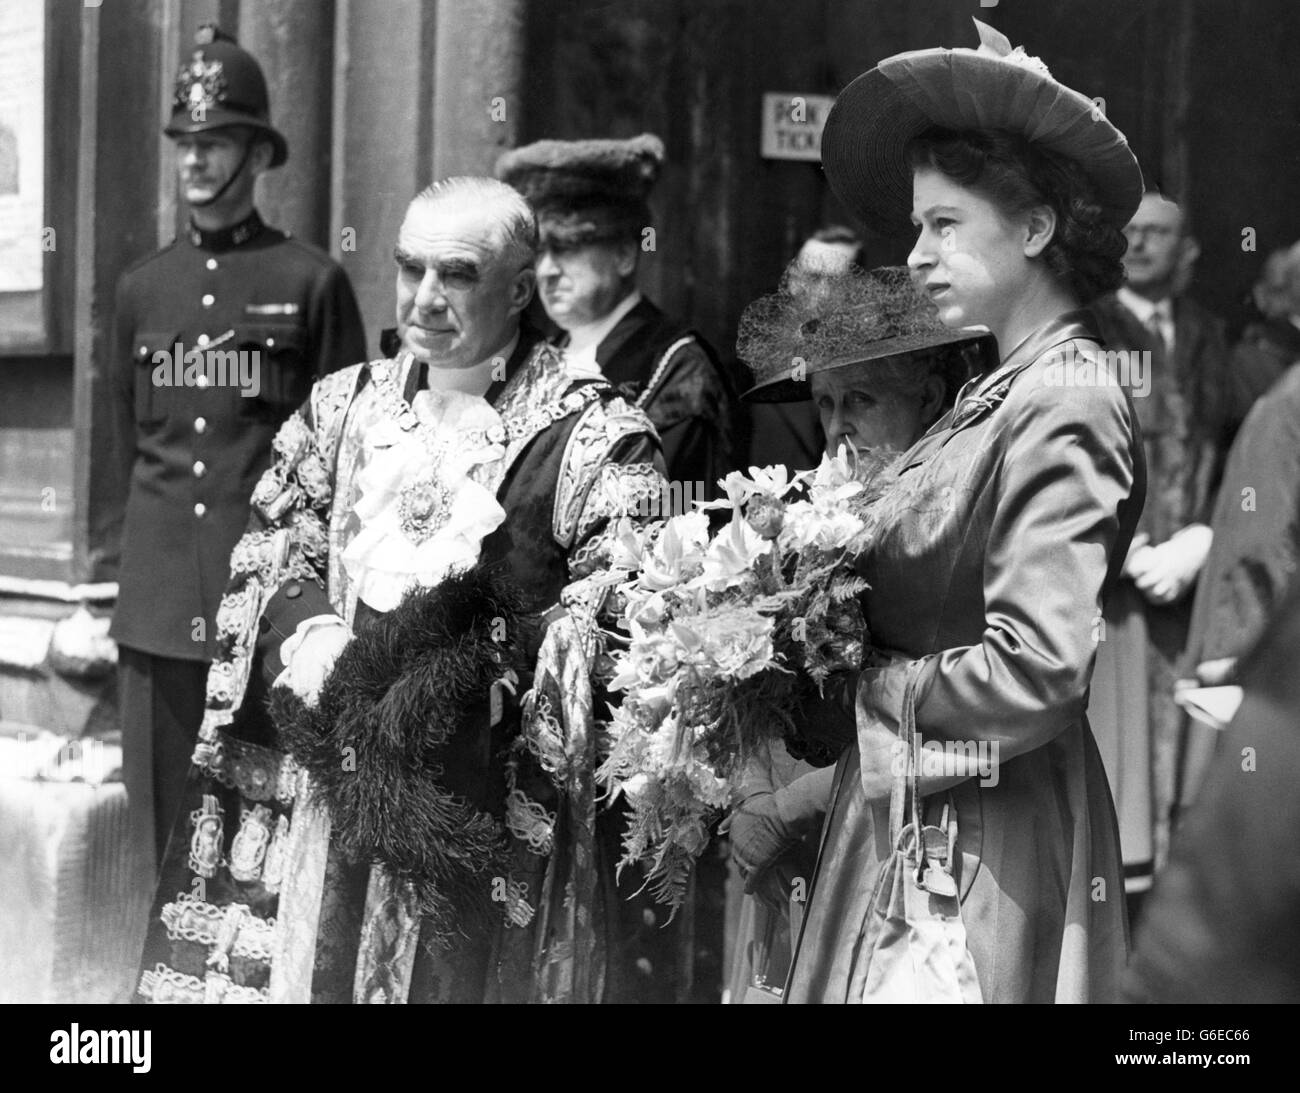 Crowds lined the route from Buckingham Palace to the Guildhall, London, to see the DUKE OF EDINBURGH accompanied by his wife PRINCESS ELIZABETH, escorted by an escort of the Household Gavalry, drive to the Guildhall where the DUKE received the Freedom of the City of London. He signed the role immediately under the name of PRINCESS ELIZABETH- the last person to sign it. PICTURE SHOWS: H.R.H.PRINCESS ELIZABETH, holds a bouquet of flowers, with the Lord Mayor of London, Sir FREDERICK WELLS, when she arrived with the DUKE OF EDINBURGH at the Guildhall. Stock Photo